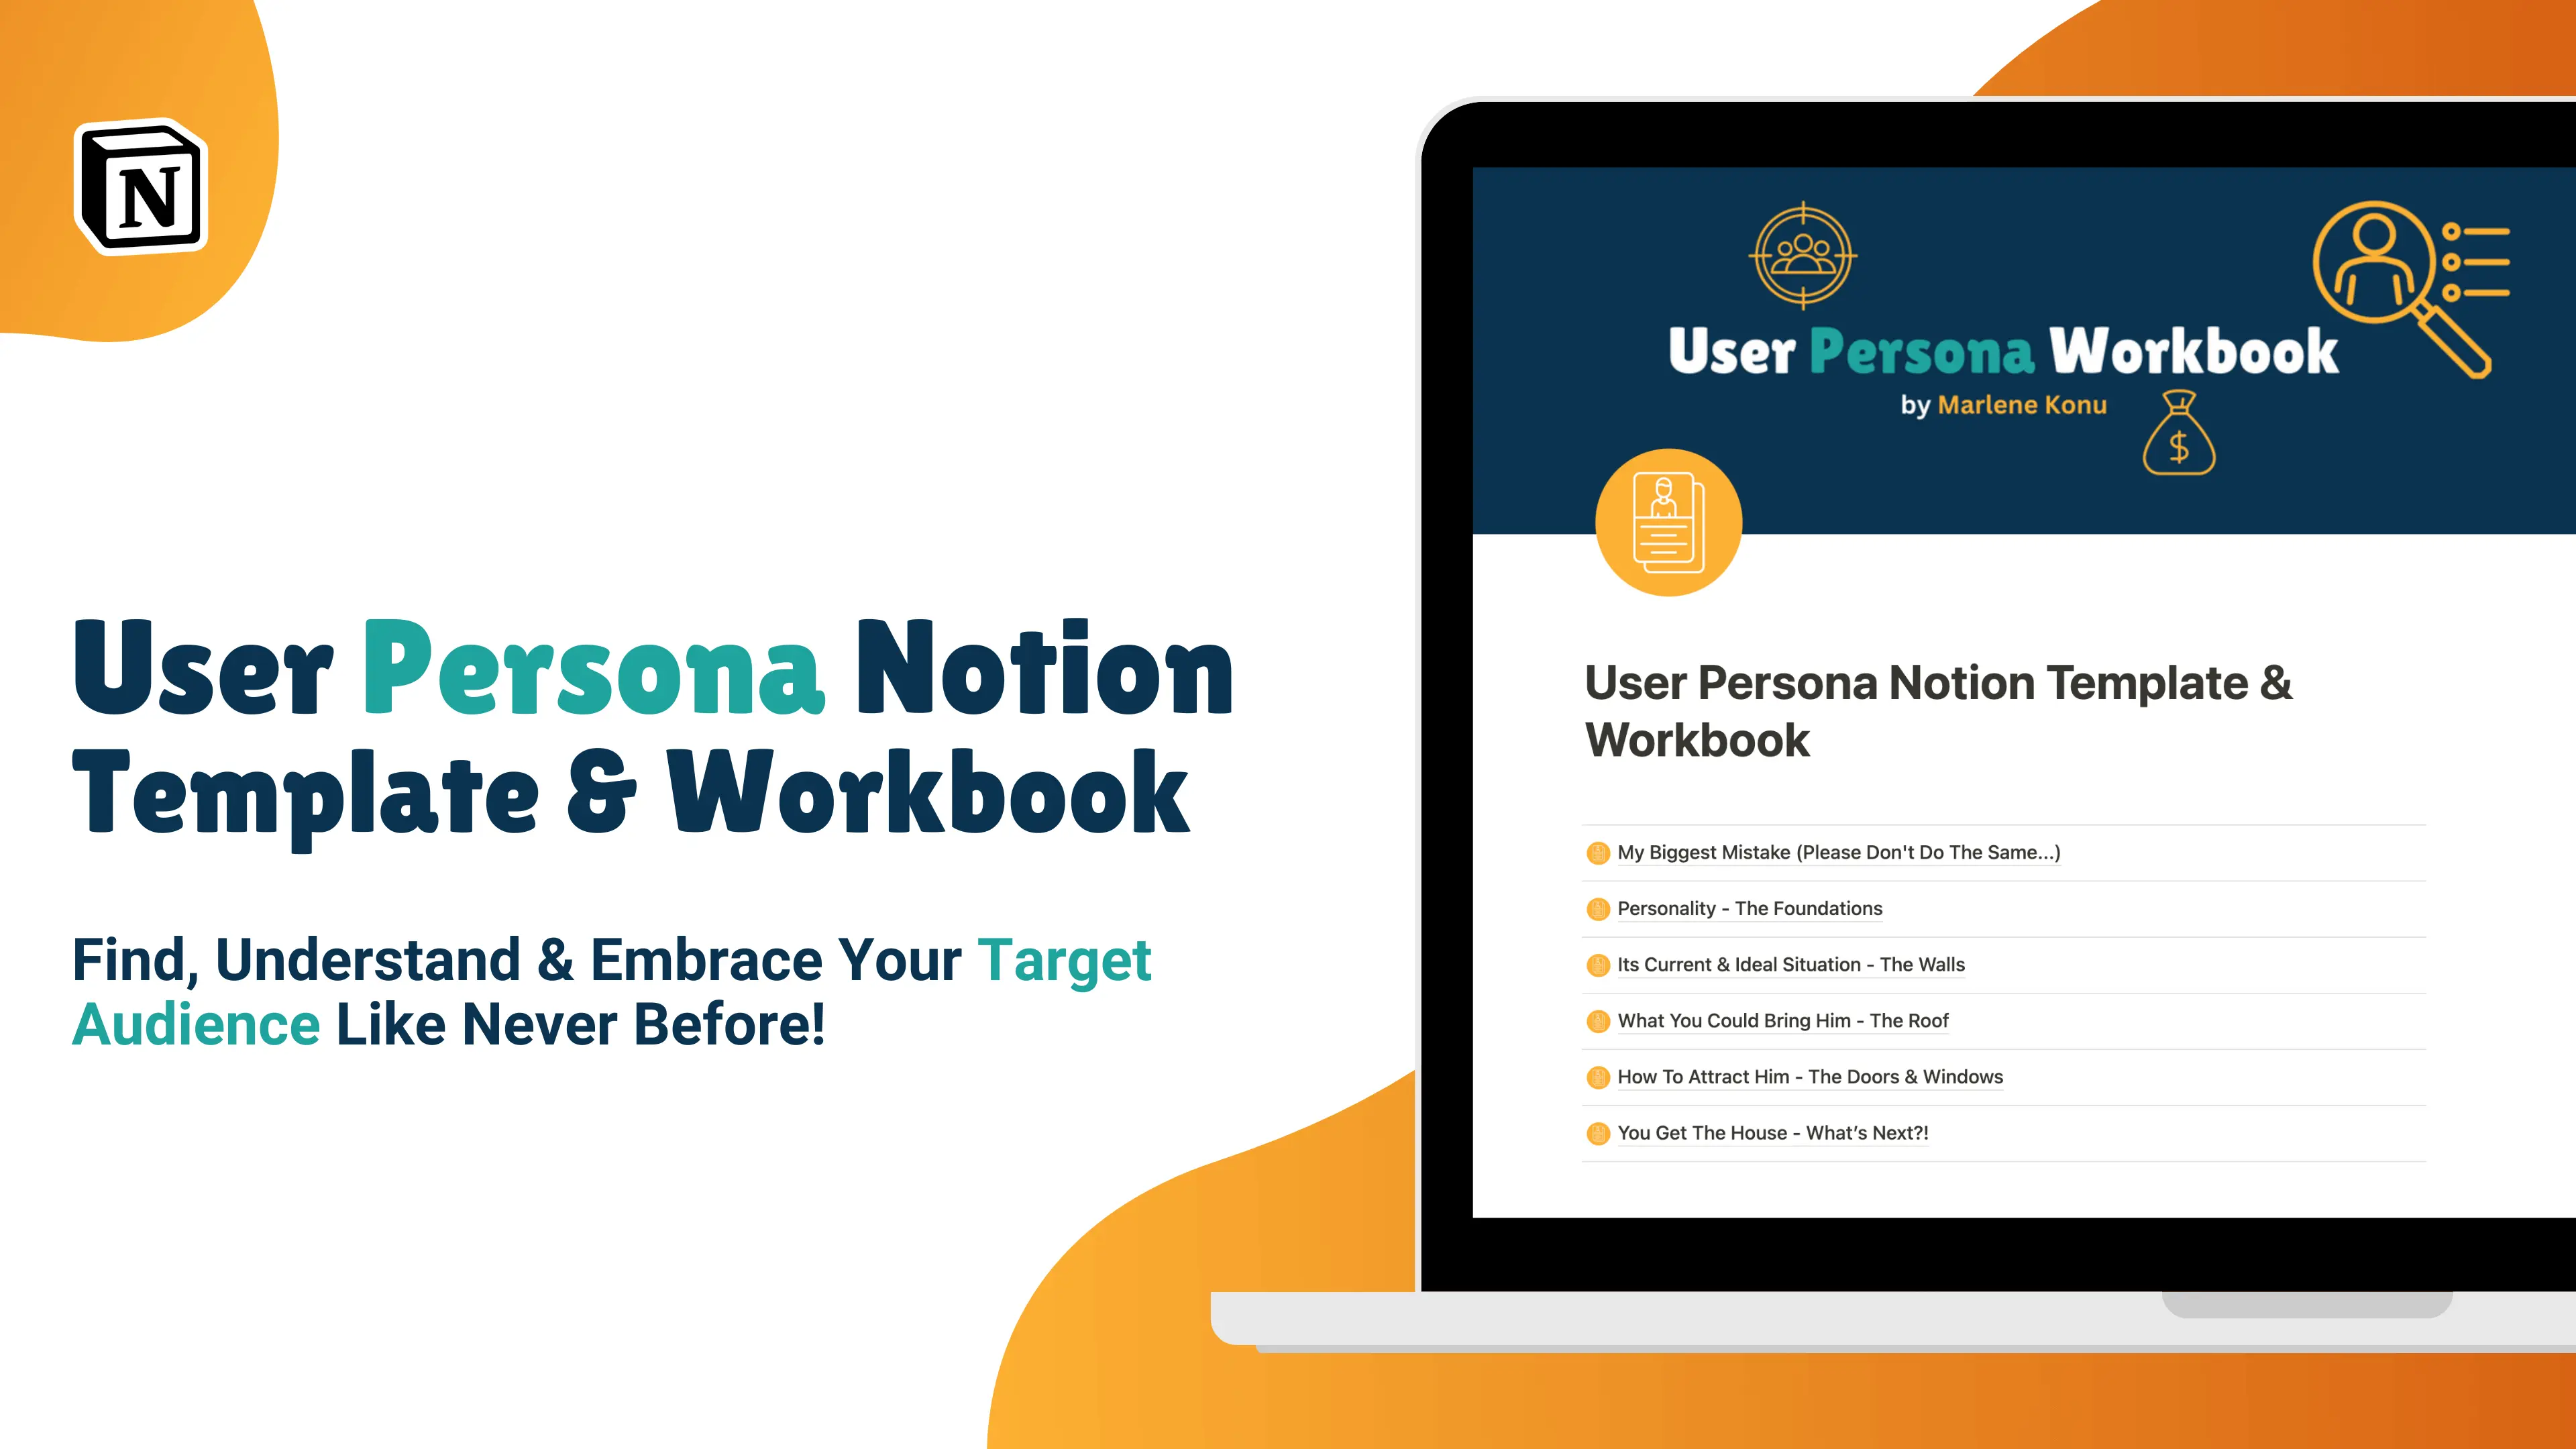 User Persona Notion Template & Workbook image